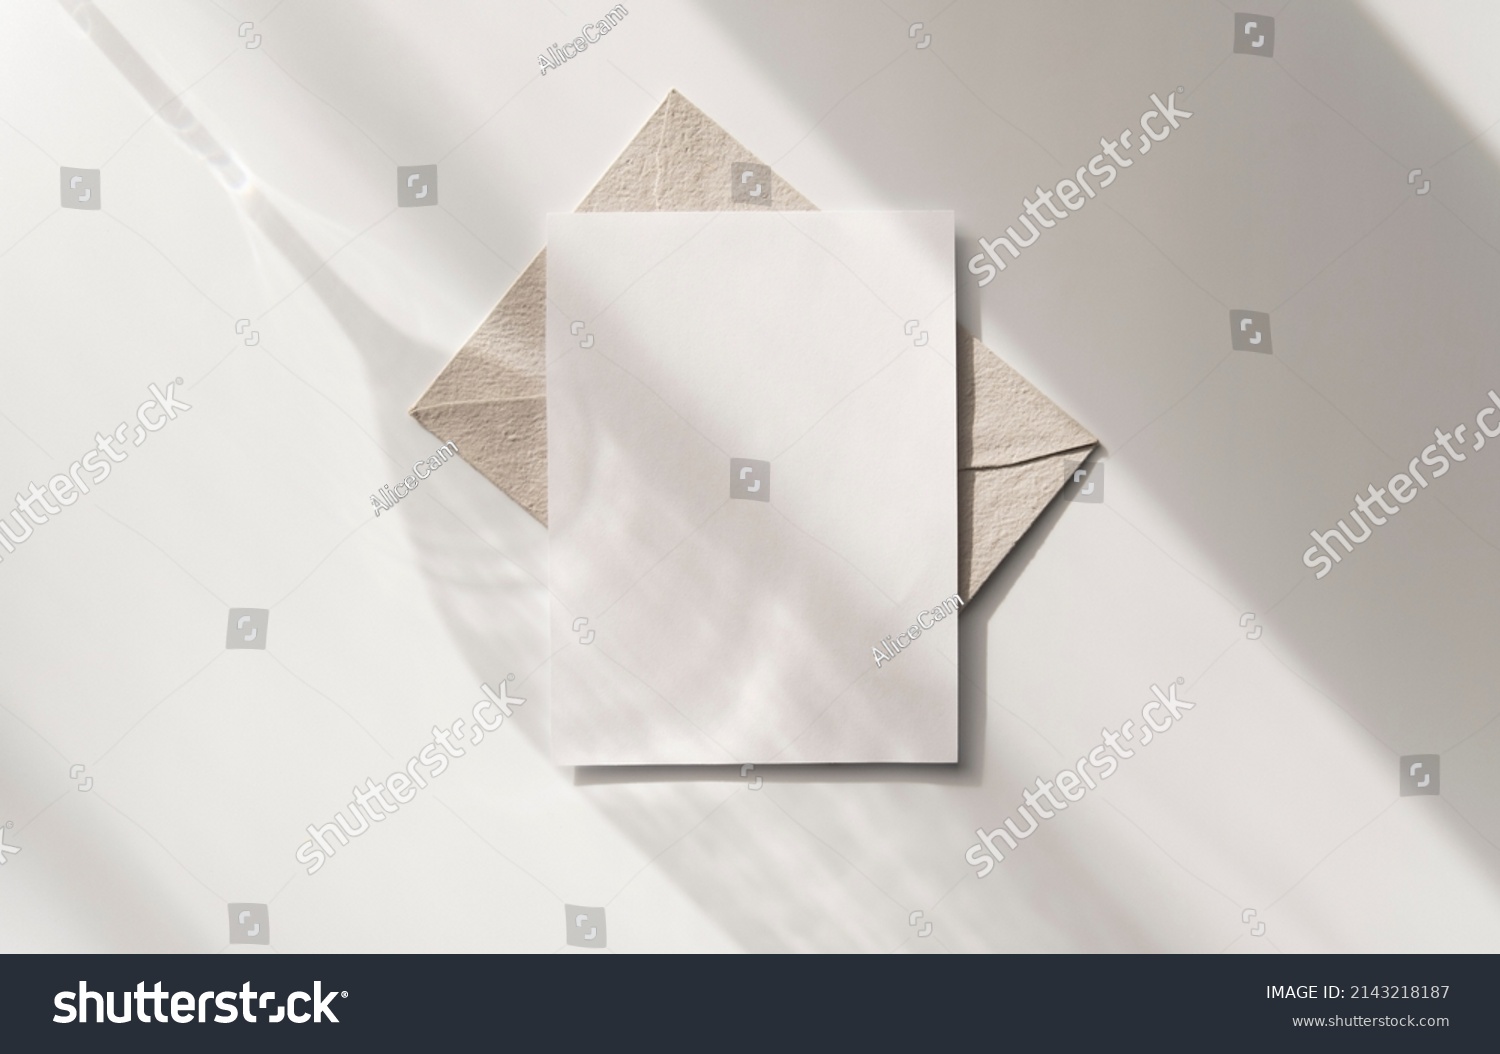 Mockup blank greeting card. Composition with shadows from a glass goblet on white background.  #2143218187